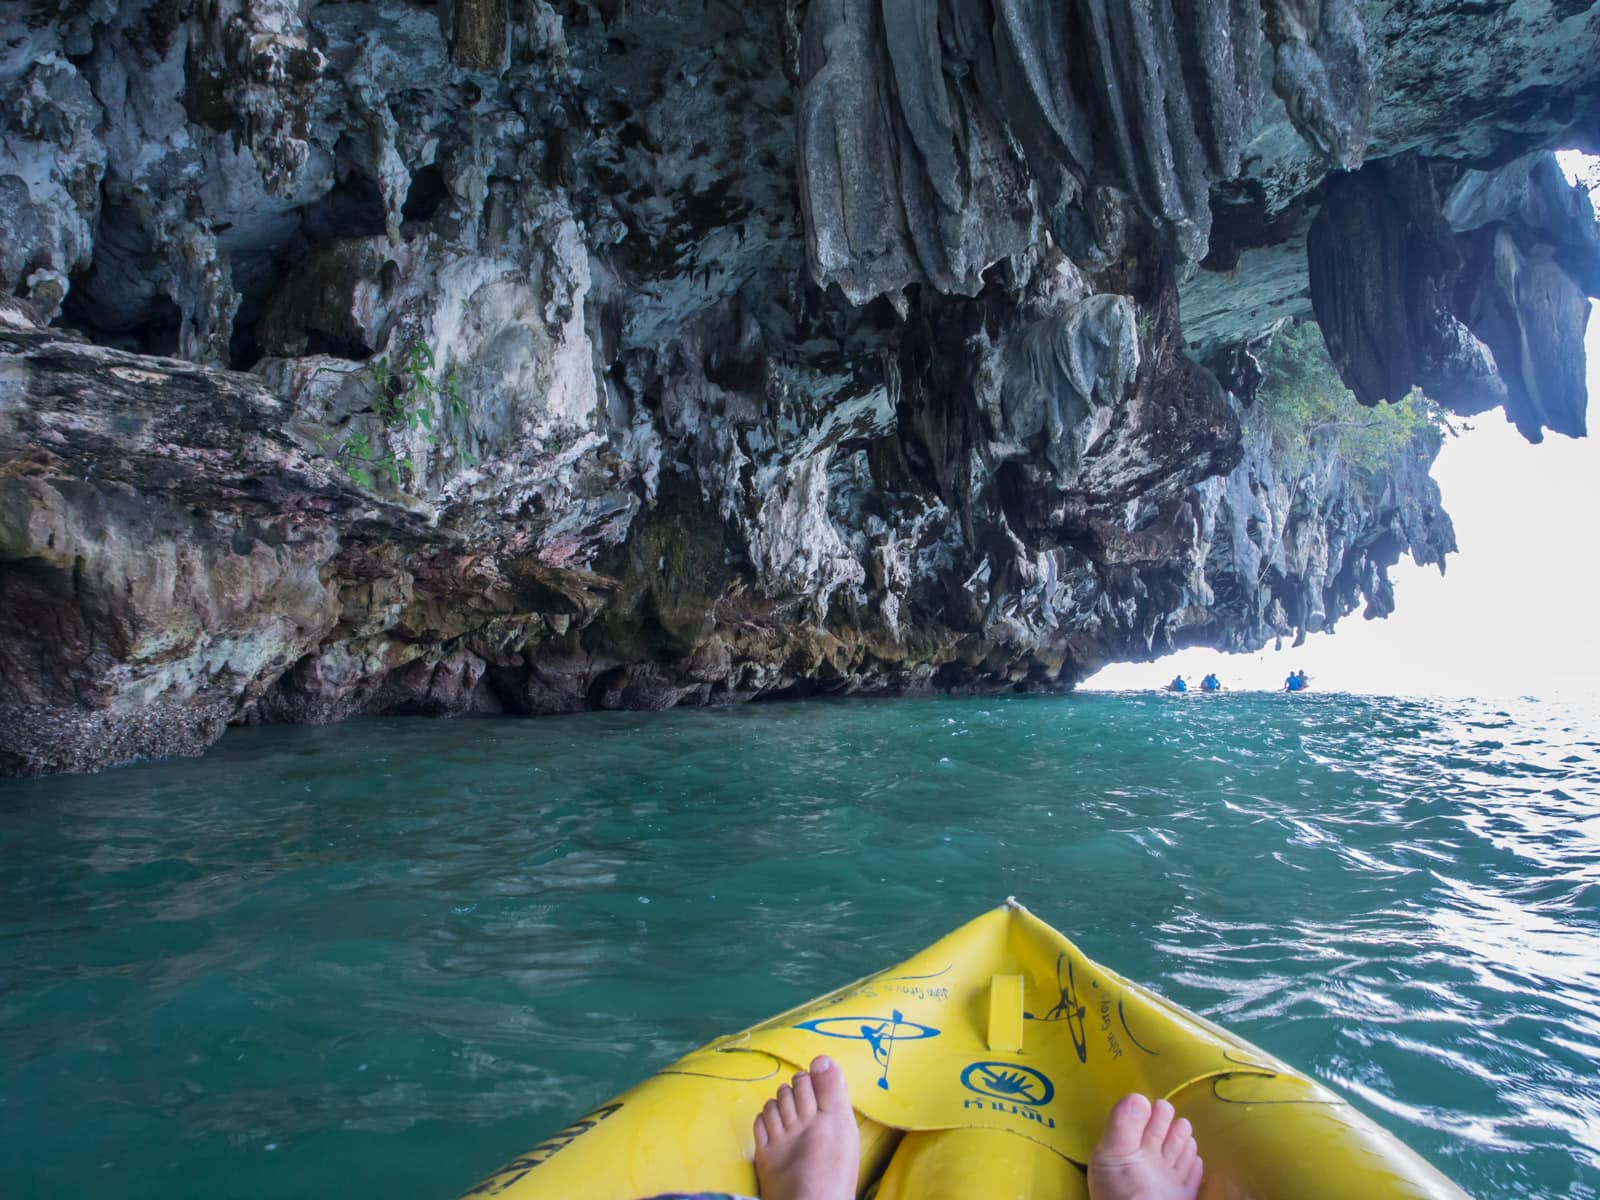 End of yellow kayak under cave overhang